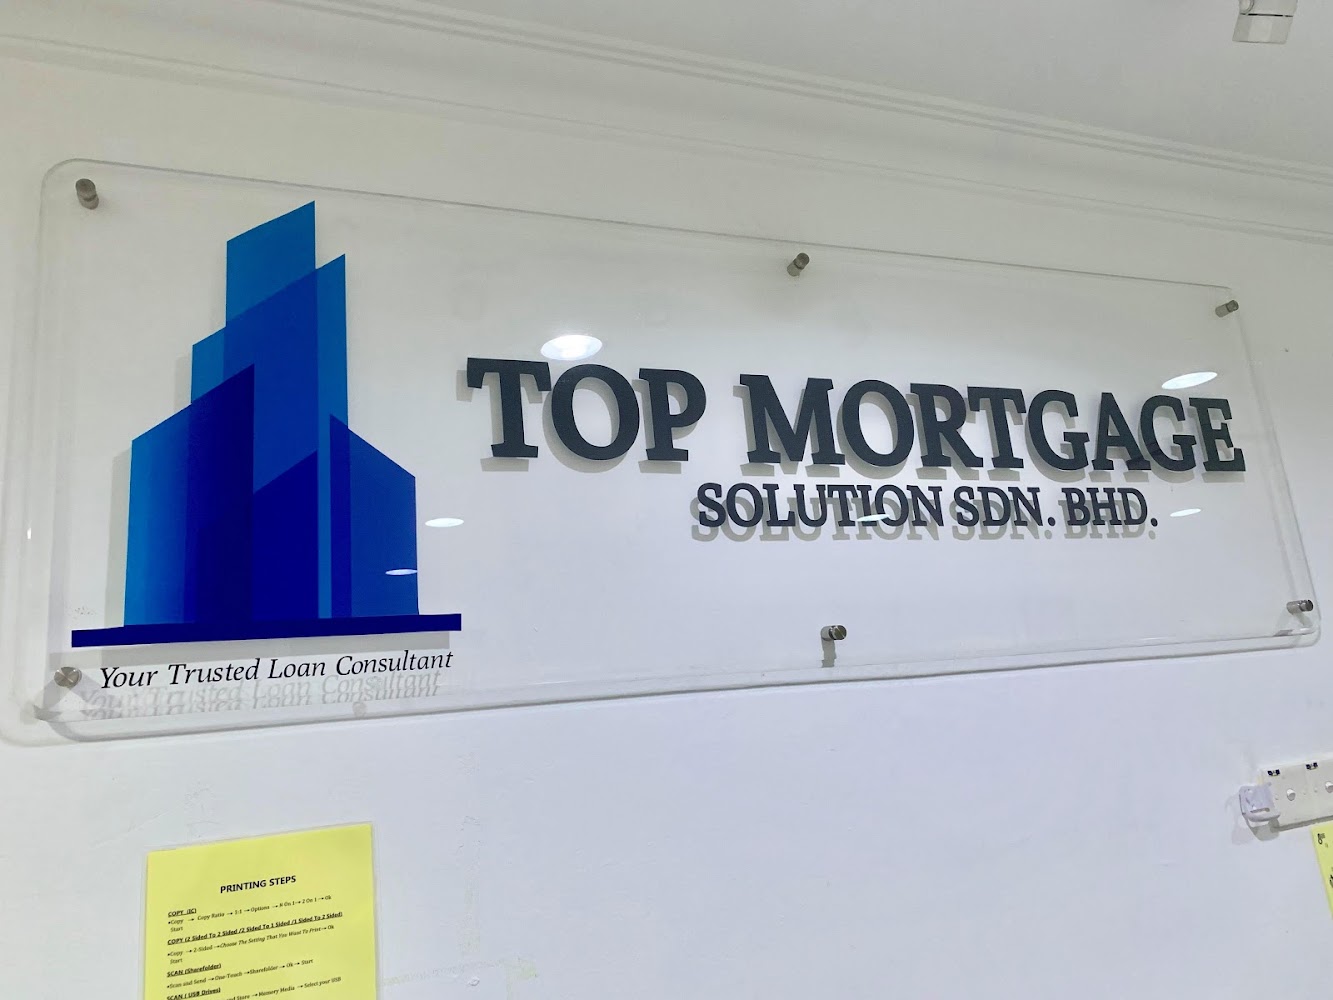 Top Mortgage Solution Sdn Bhd